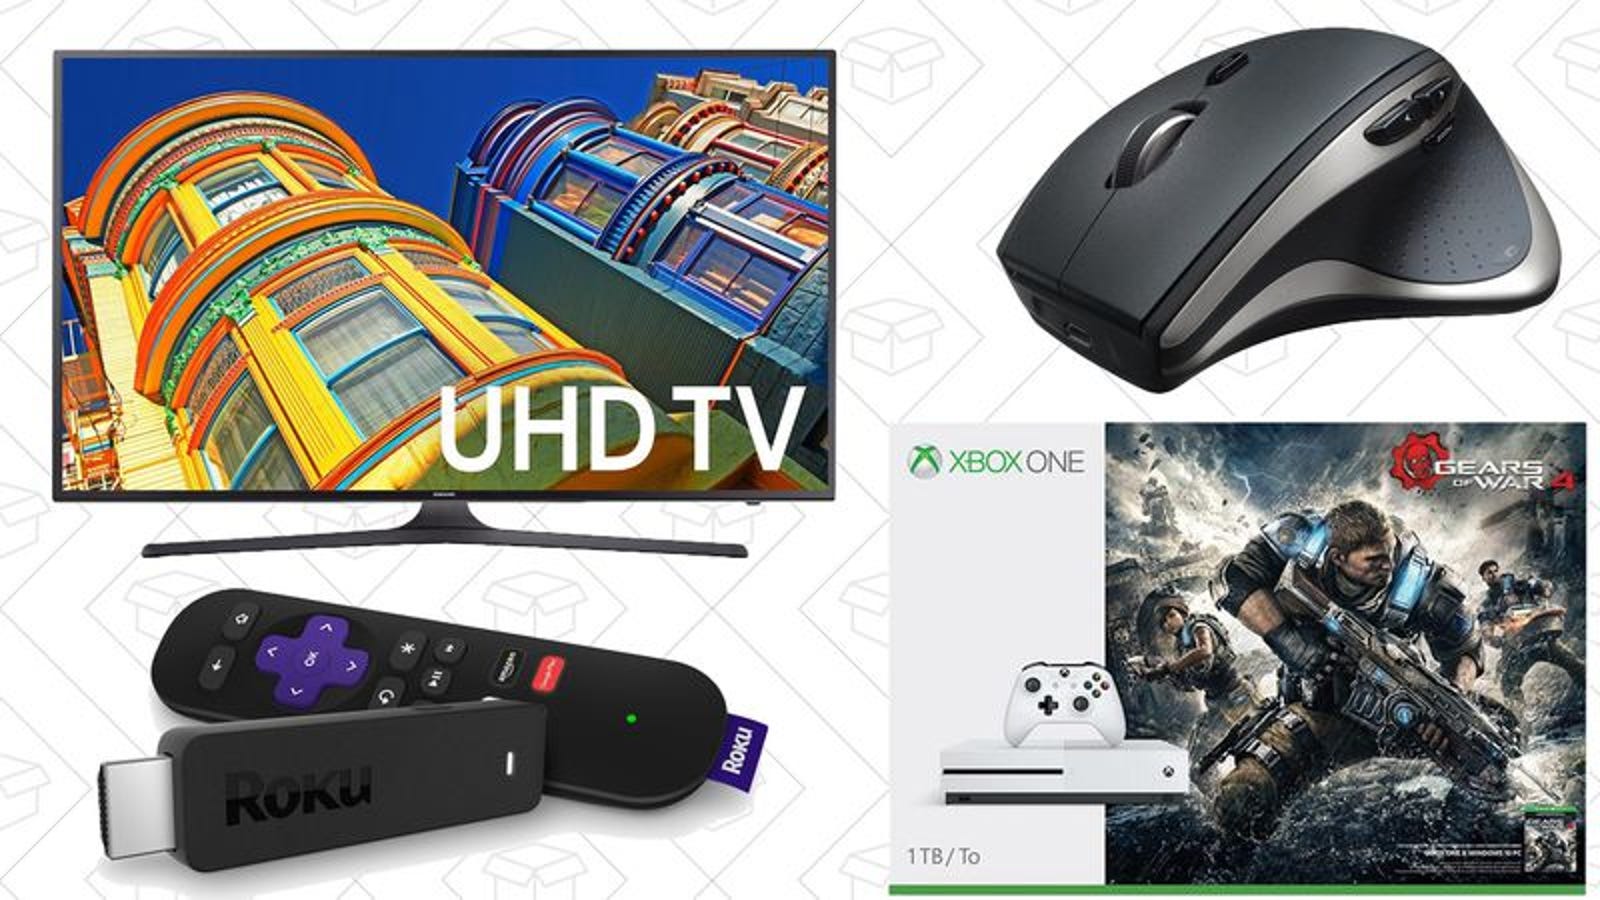 Today’s best deals: Early Black Friday TV sale, Kindle ebooks, and more